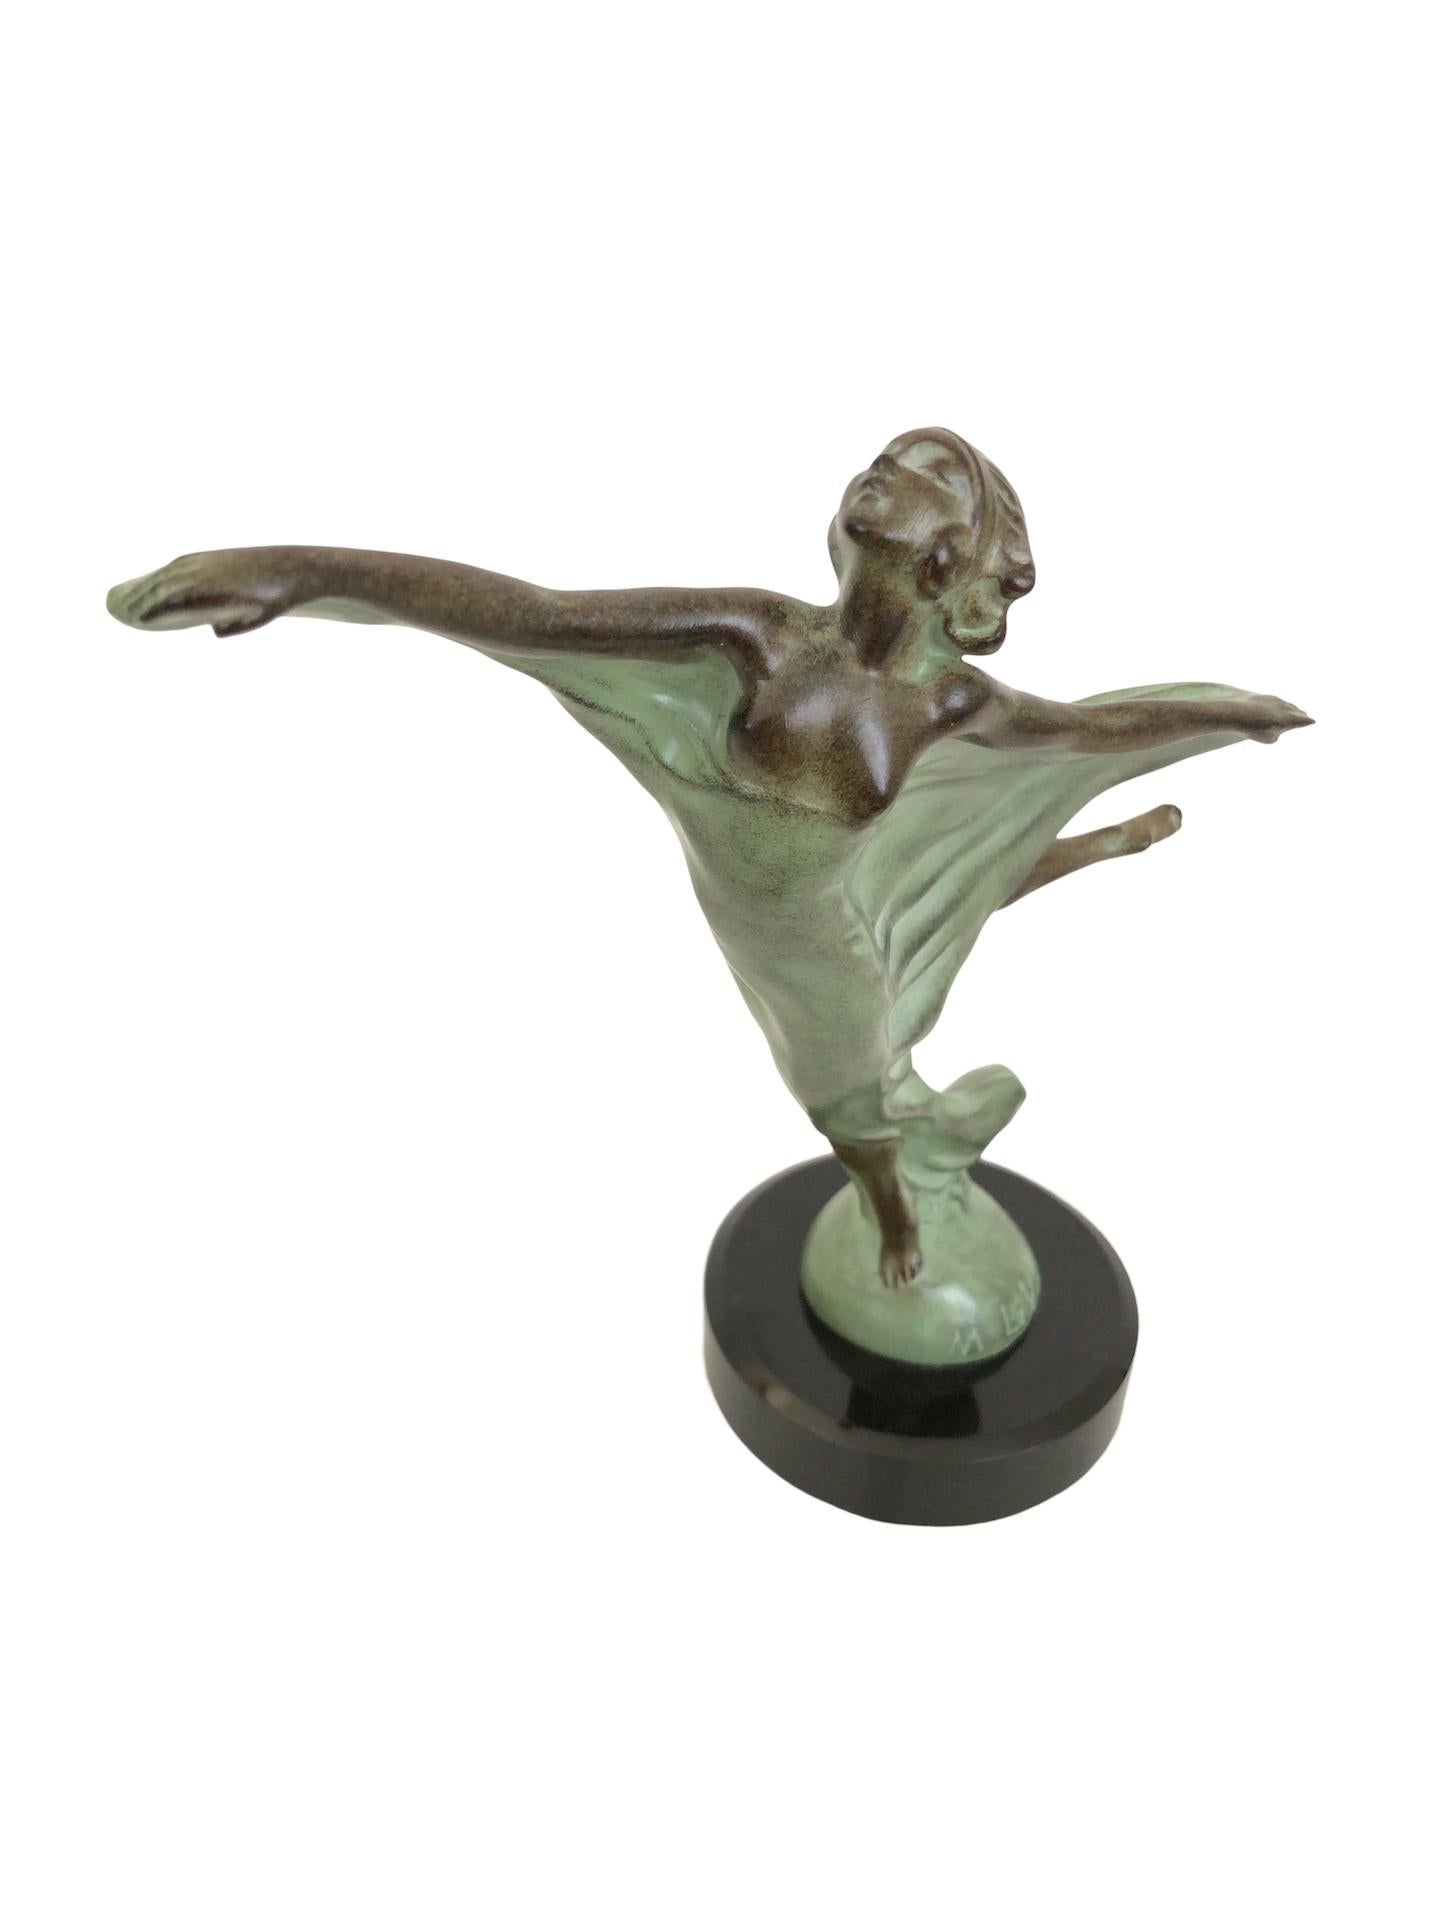 Sculpture Envol Dancer French Art Deco Style Radiator Mascot from Max Le Verrier 1